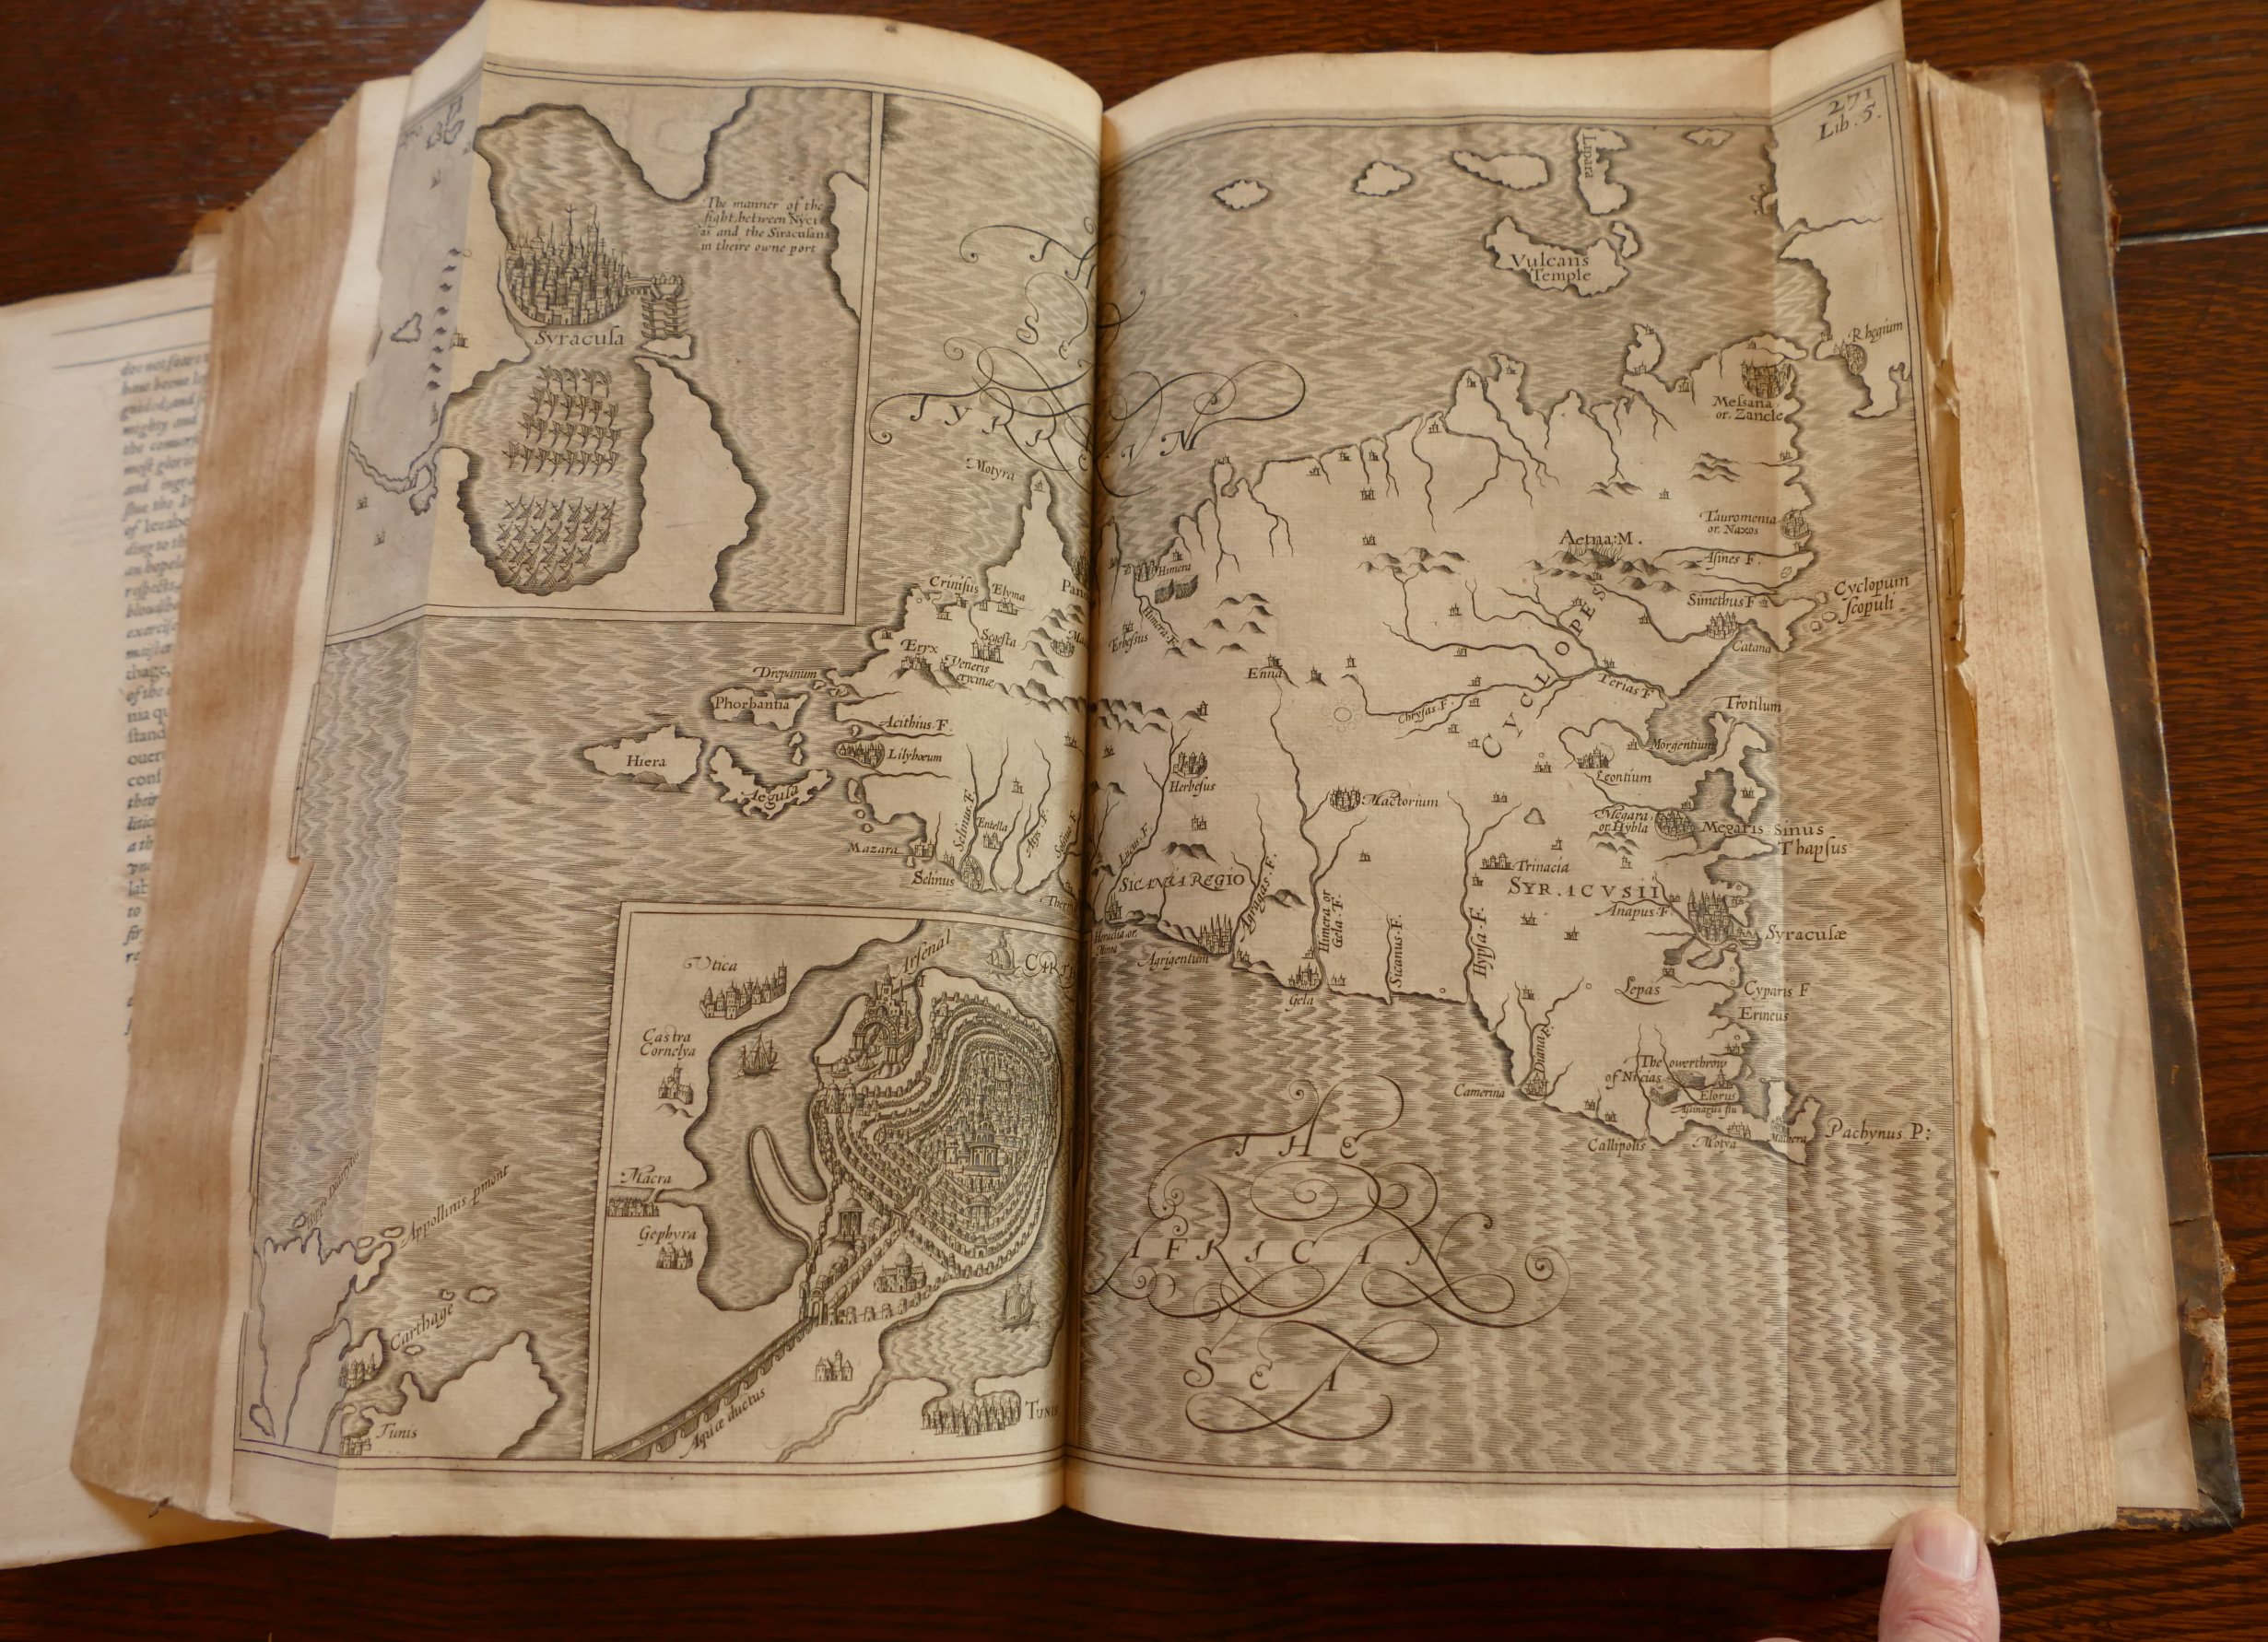 RALEIGH, Sir Walter, History of the World, At London printed for Walter Burne 1614 (1617), folio, - Image 5 of 8